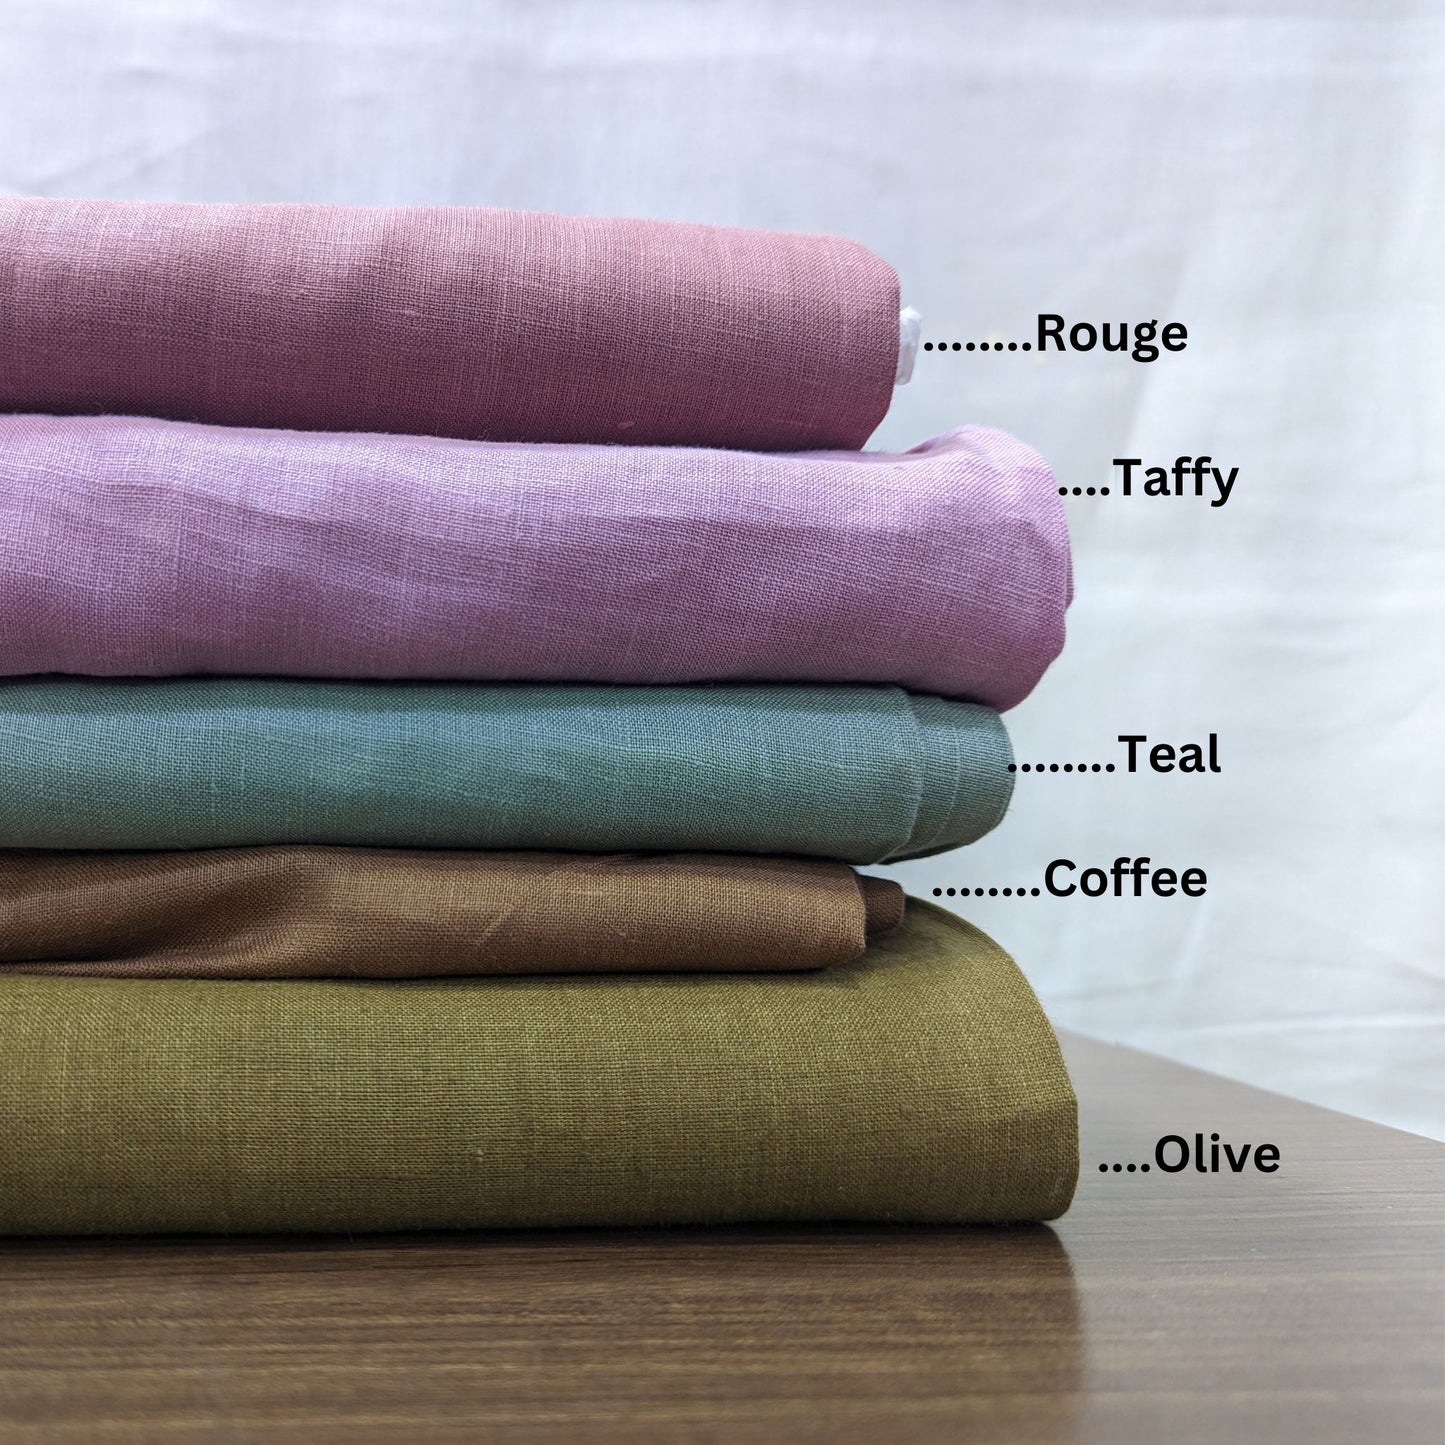 Vintage: Versatile Pure Linen Fabric, Used for Shirts, Tops, Dresses, Palazzos - OrganoLinen